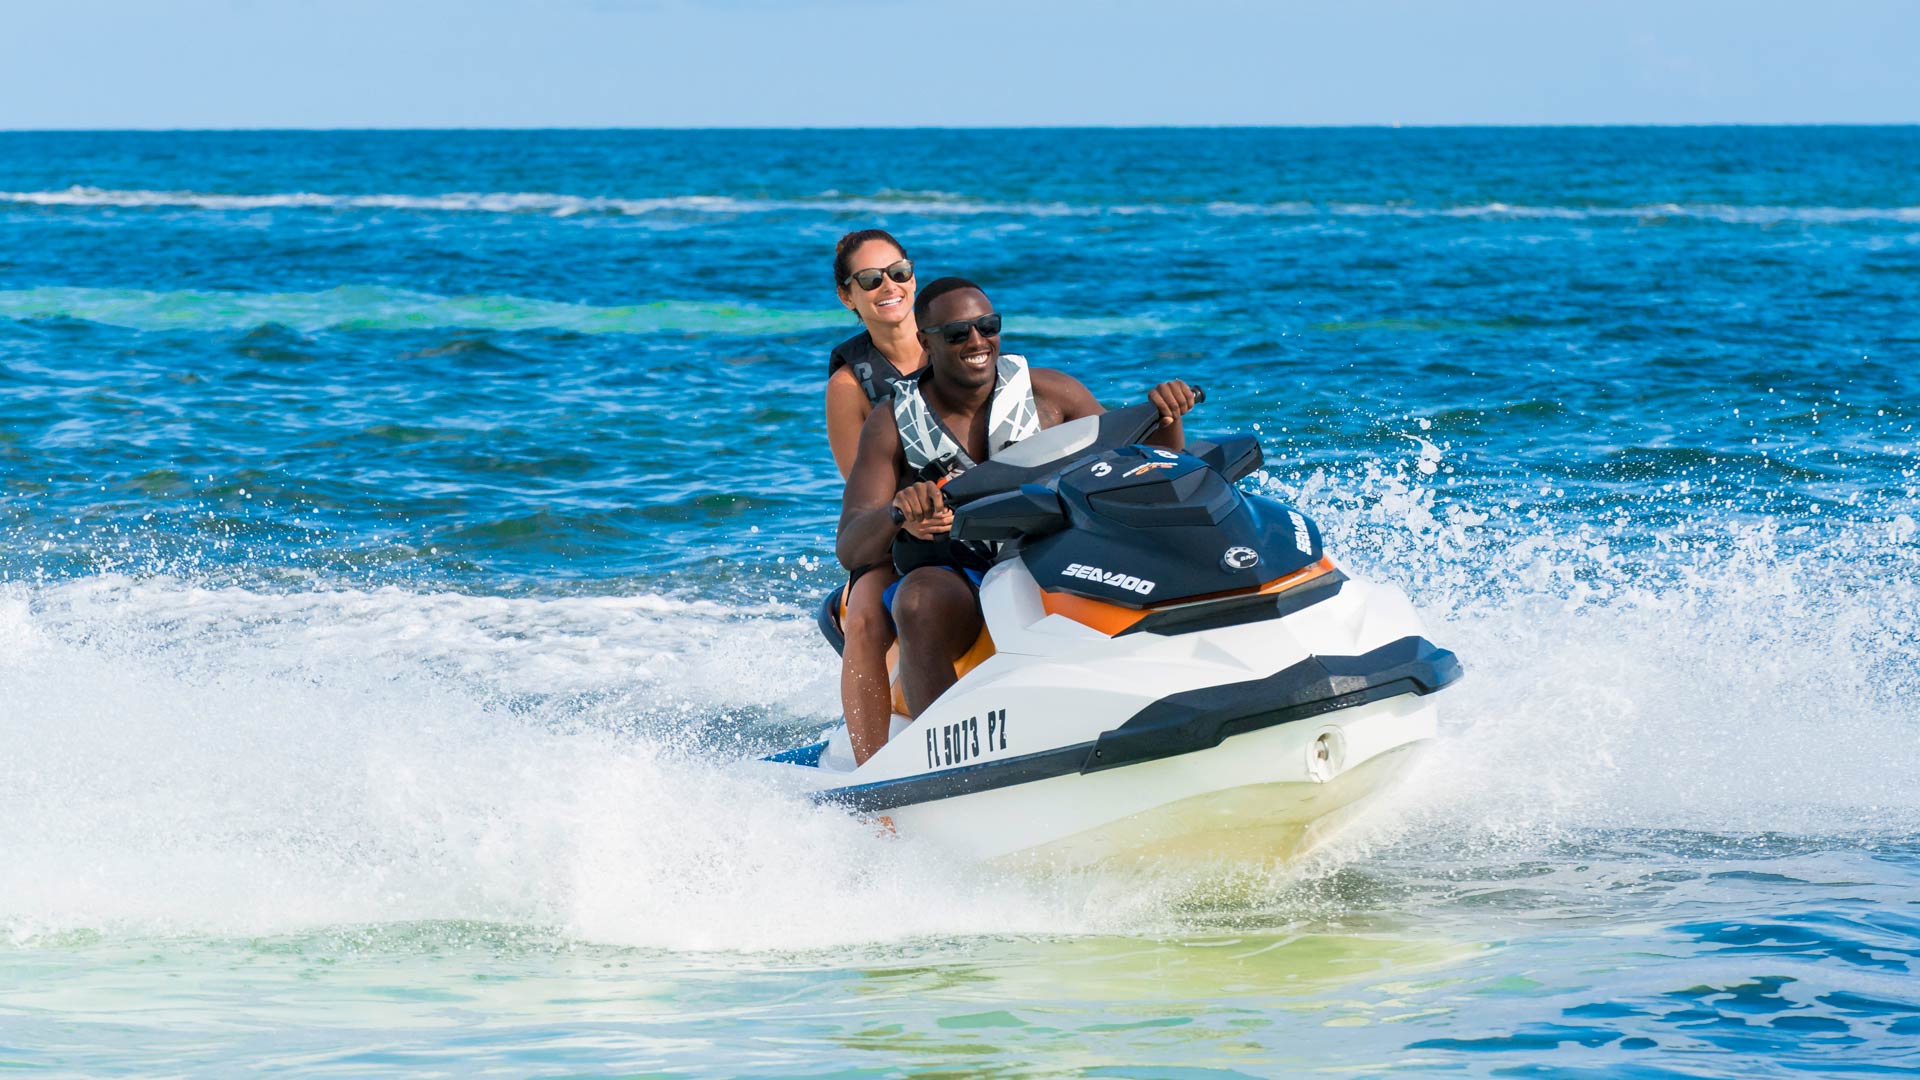 Man and woman riding a jet ski in choppy ocean waters